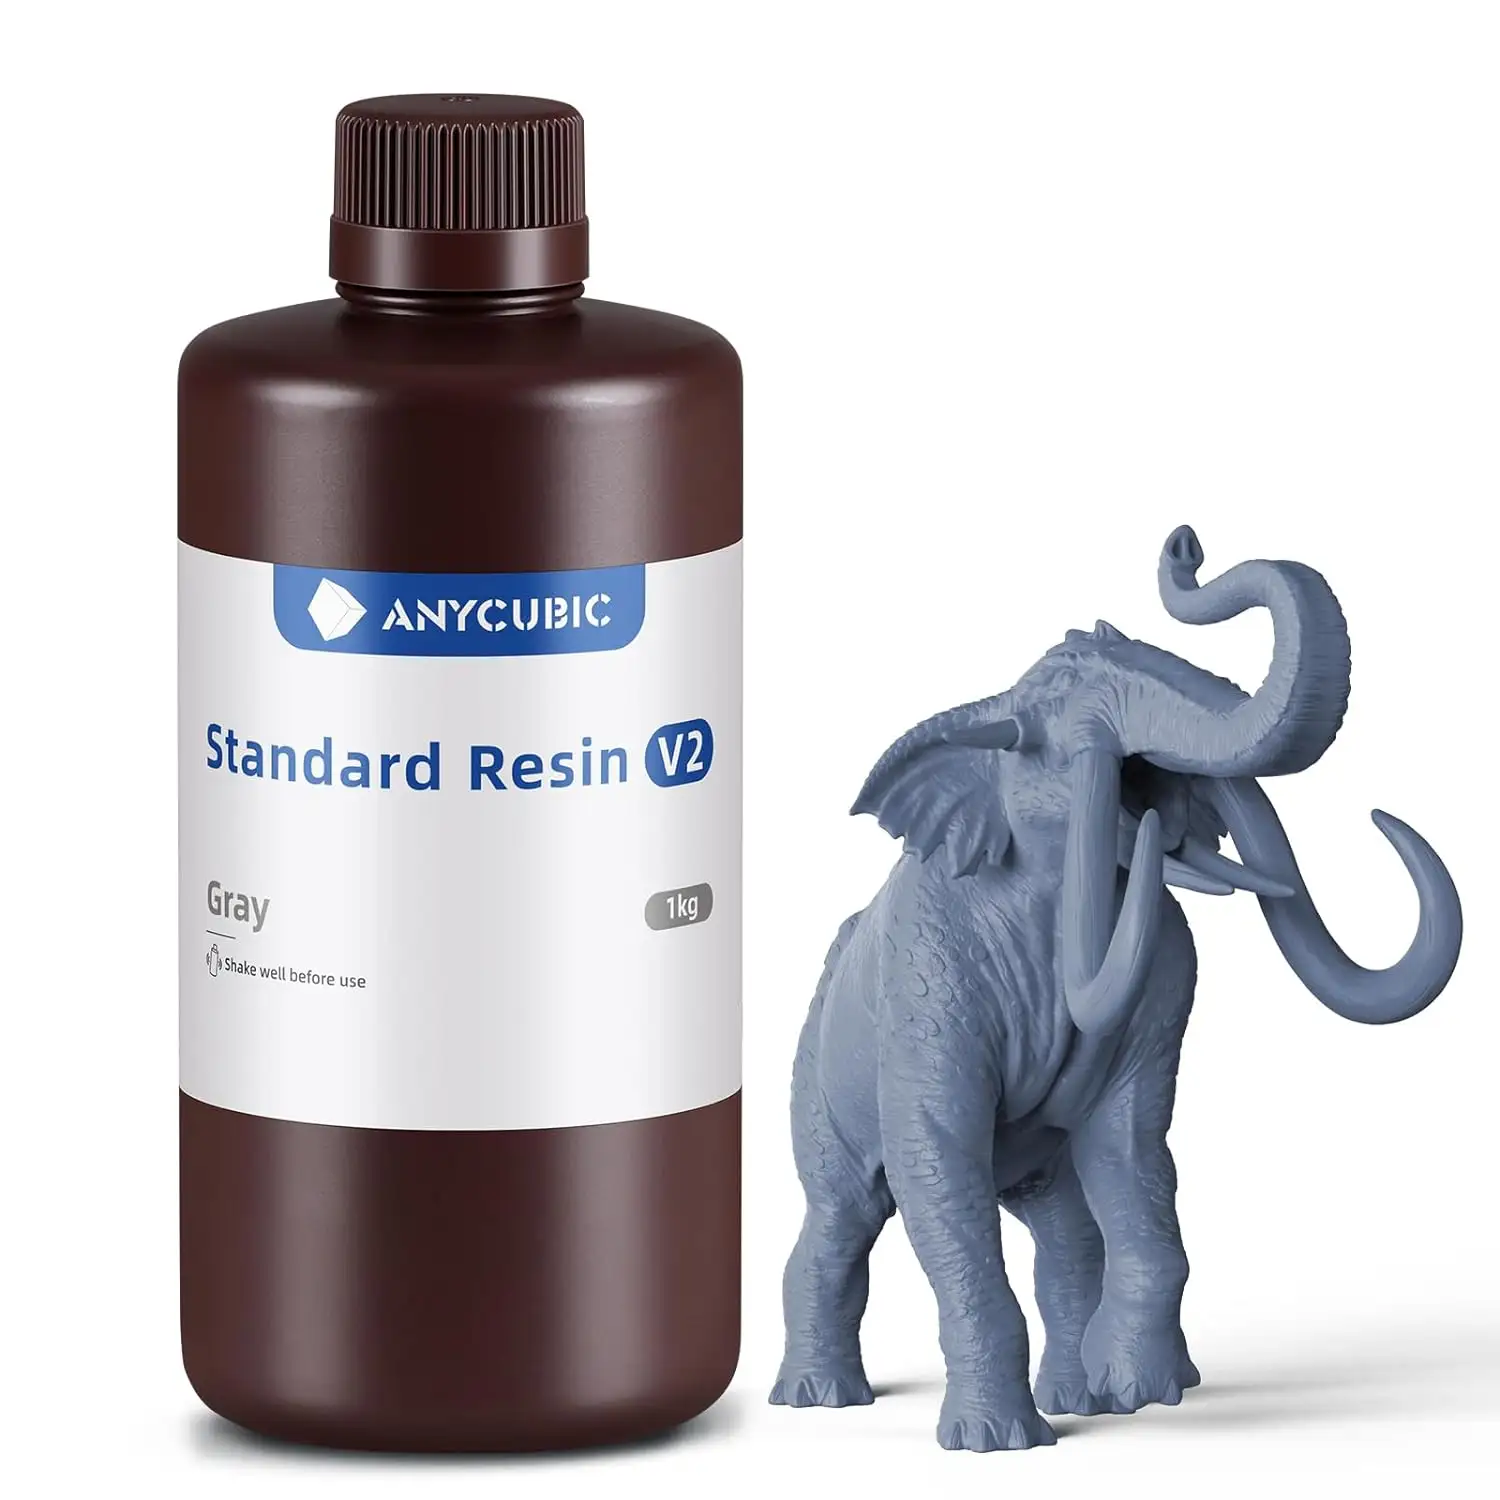 ANYCUBIC UV Standard Resin V2 Enhanced Toughness and Strength for LCD Photon 3D Printer